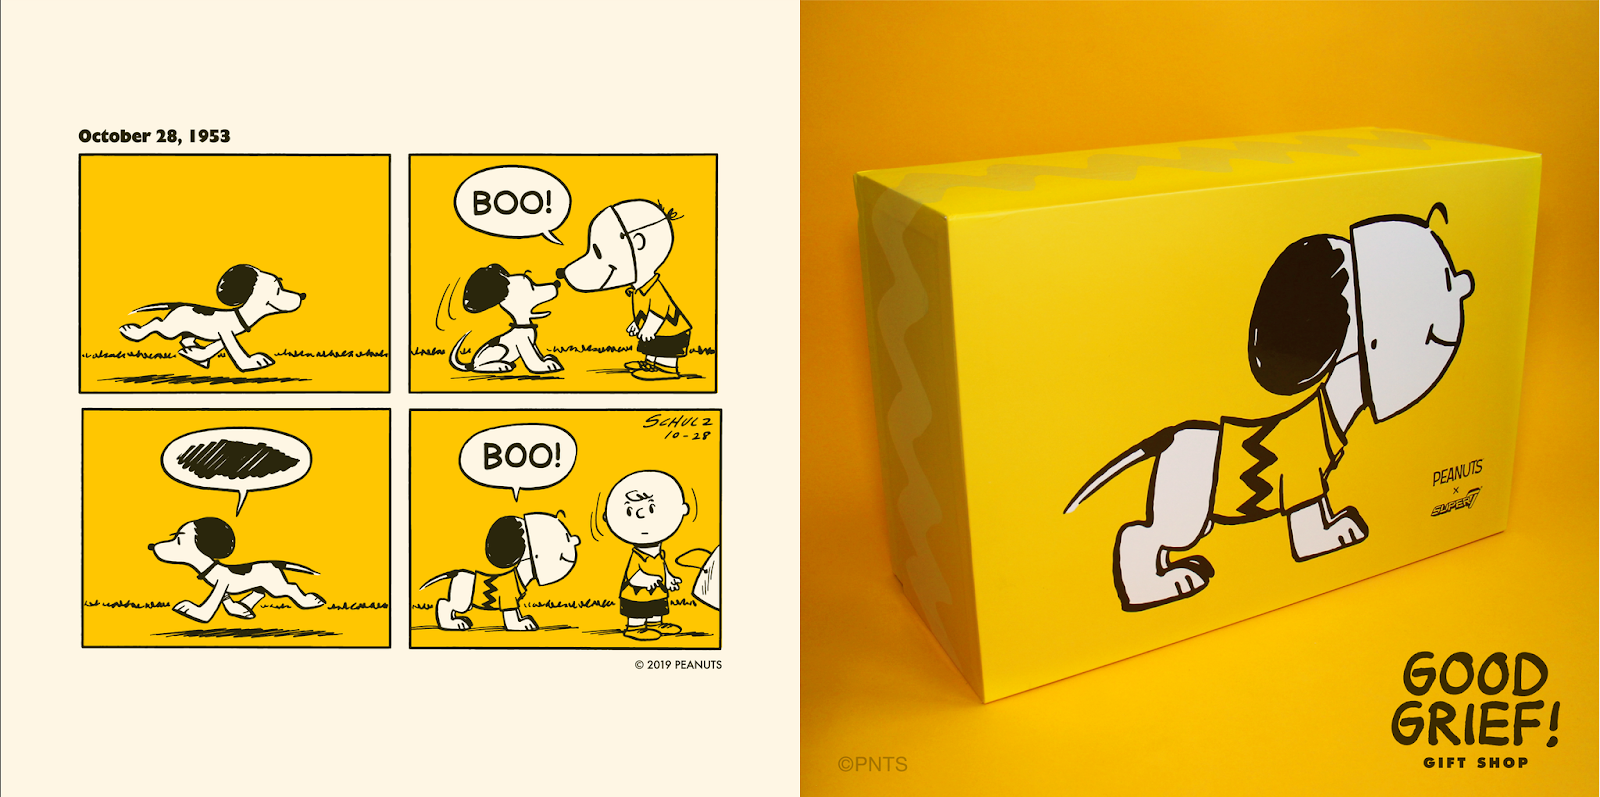 SDCC 2019 EXCLUSIVE MORE PEANUTS BOOK SAN DIEGO COMIC CON SNOOPY CHARLIE BROWN 